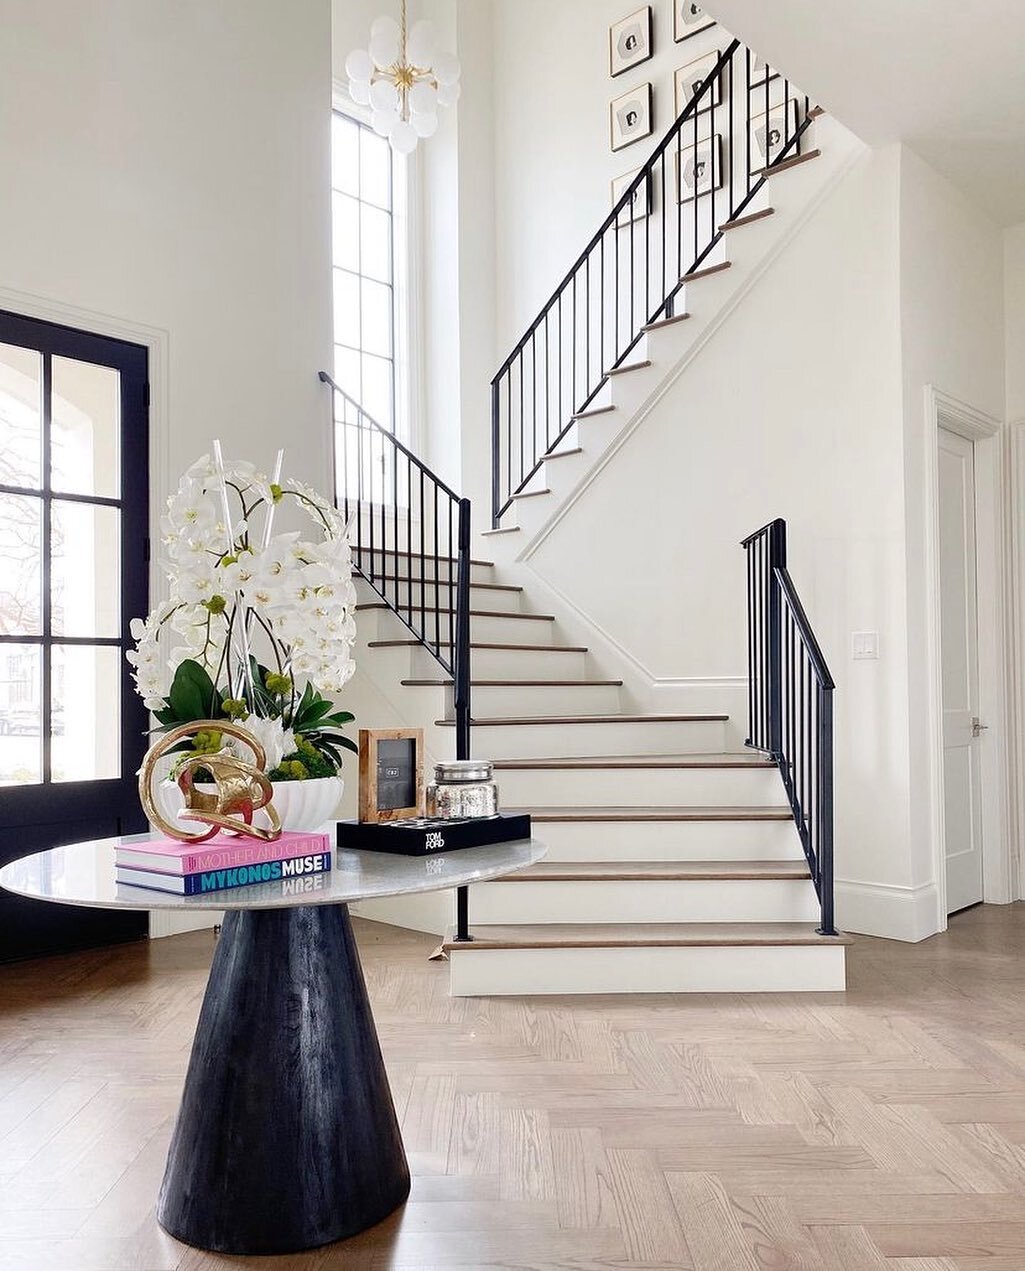 Stepping into the weekend!! 🙌🙌 #mourtonmanor &bull;
&bull;
&bull;
&bull;
&bull;
&bull;
&bull;
&bull;
#entrywaygoals#entryway#housebeautifulhome#beautifulhousestyle#customstairs#dallashomes#dallasdesigners#dmagazine#candysdirt#stylemepretty#styleins